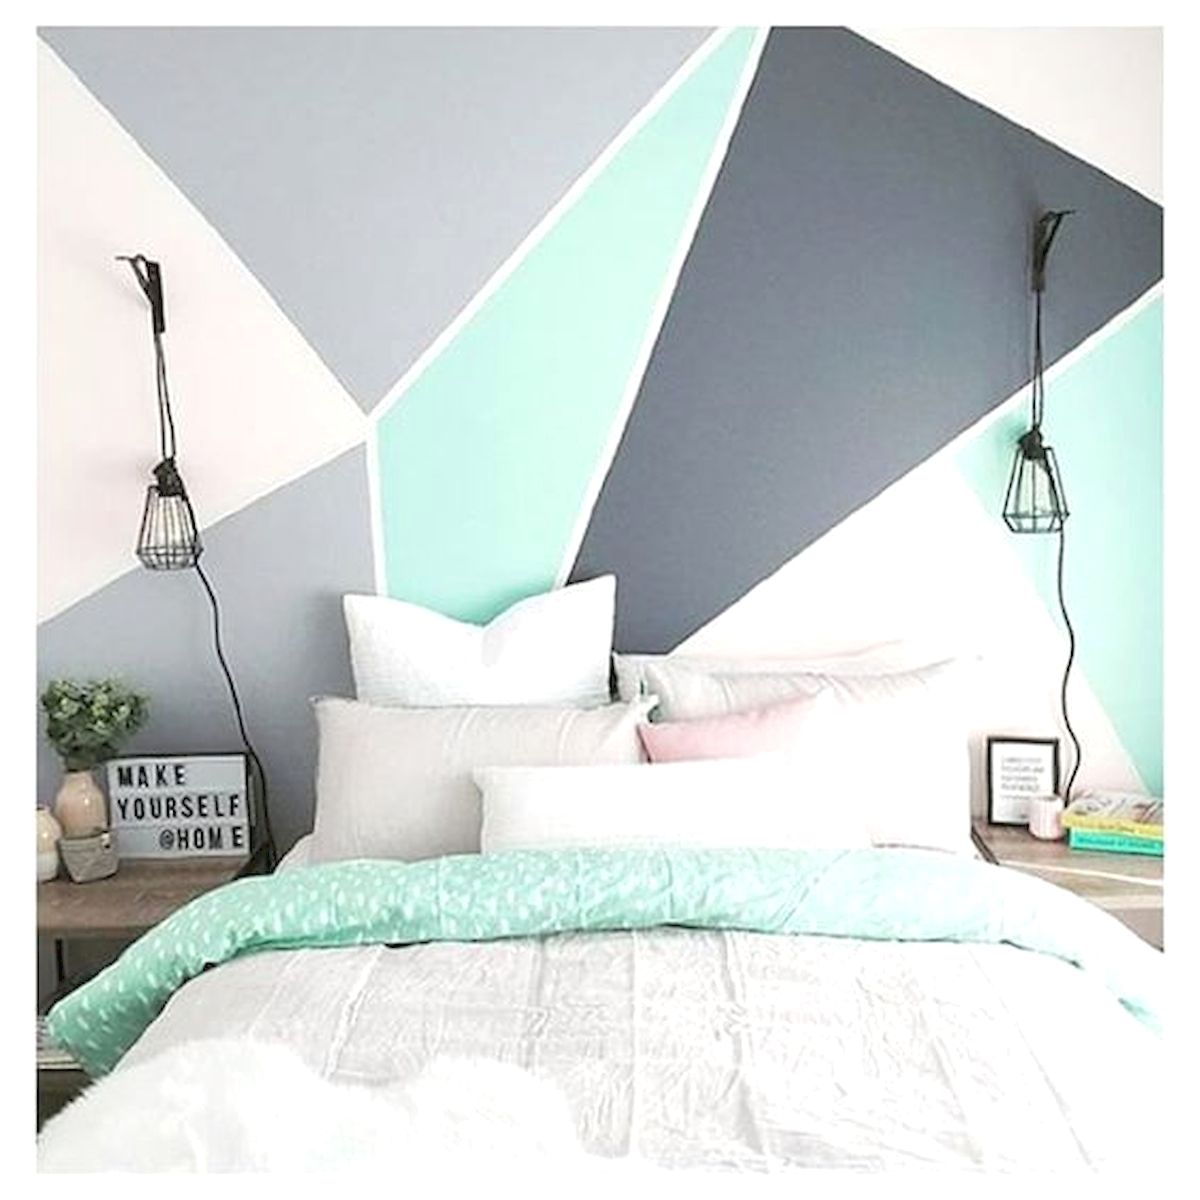 DIY Delight: Step by Step Guide To Painting A Striking Bedroom Accent Wall